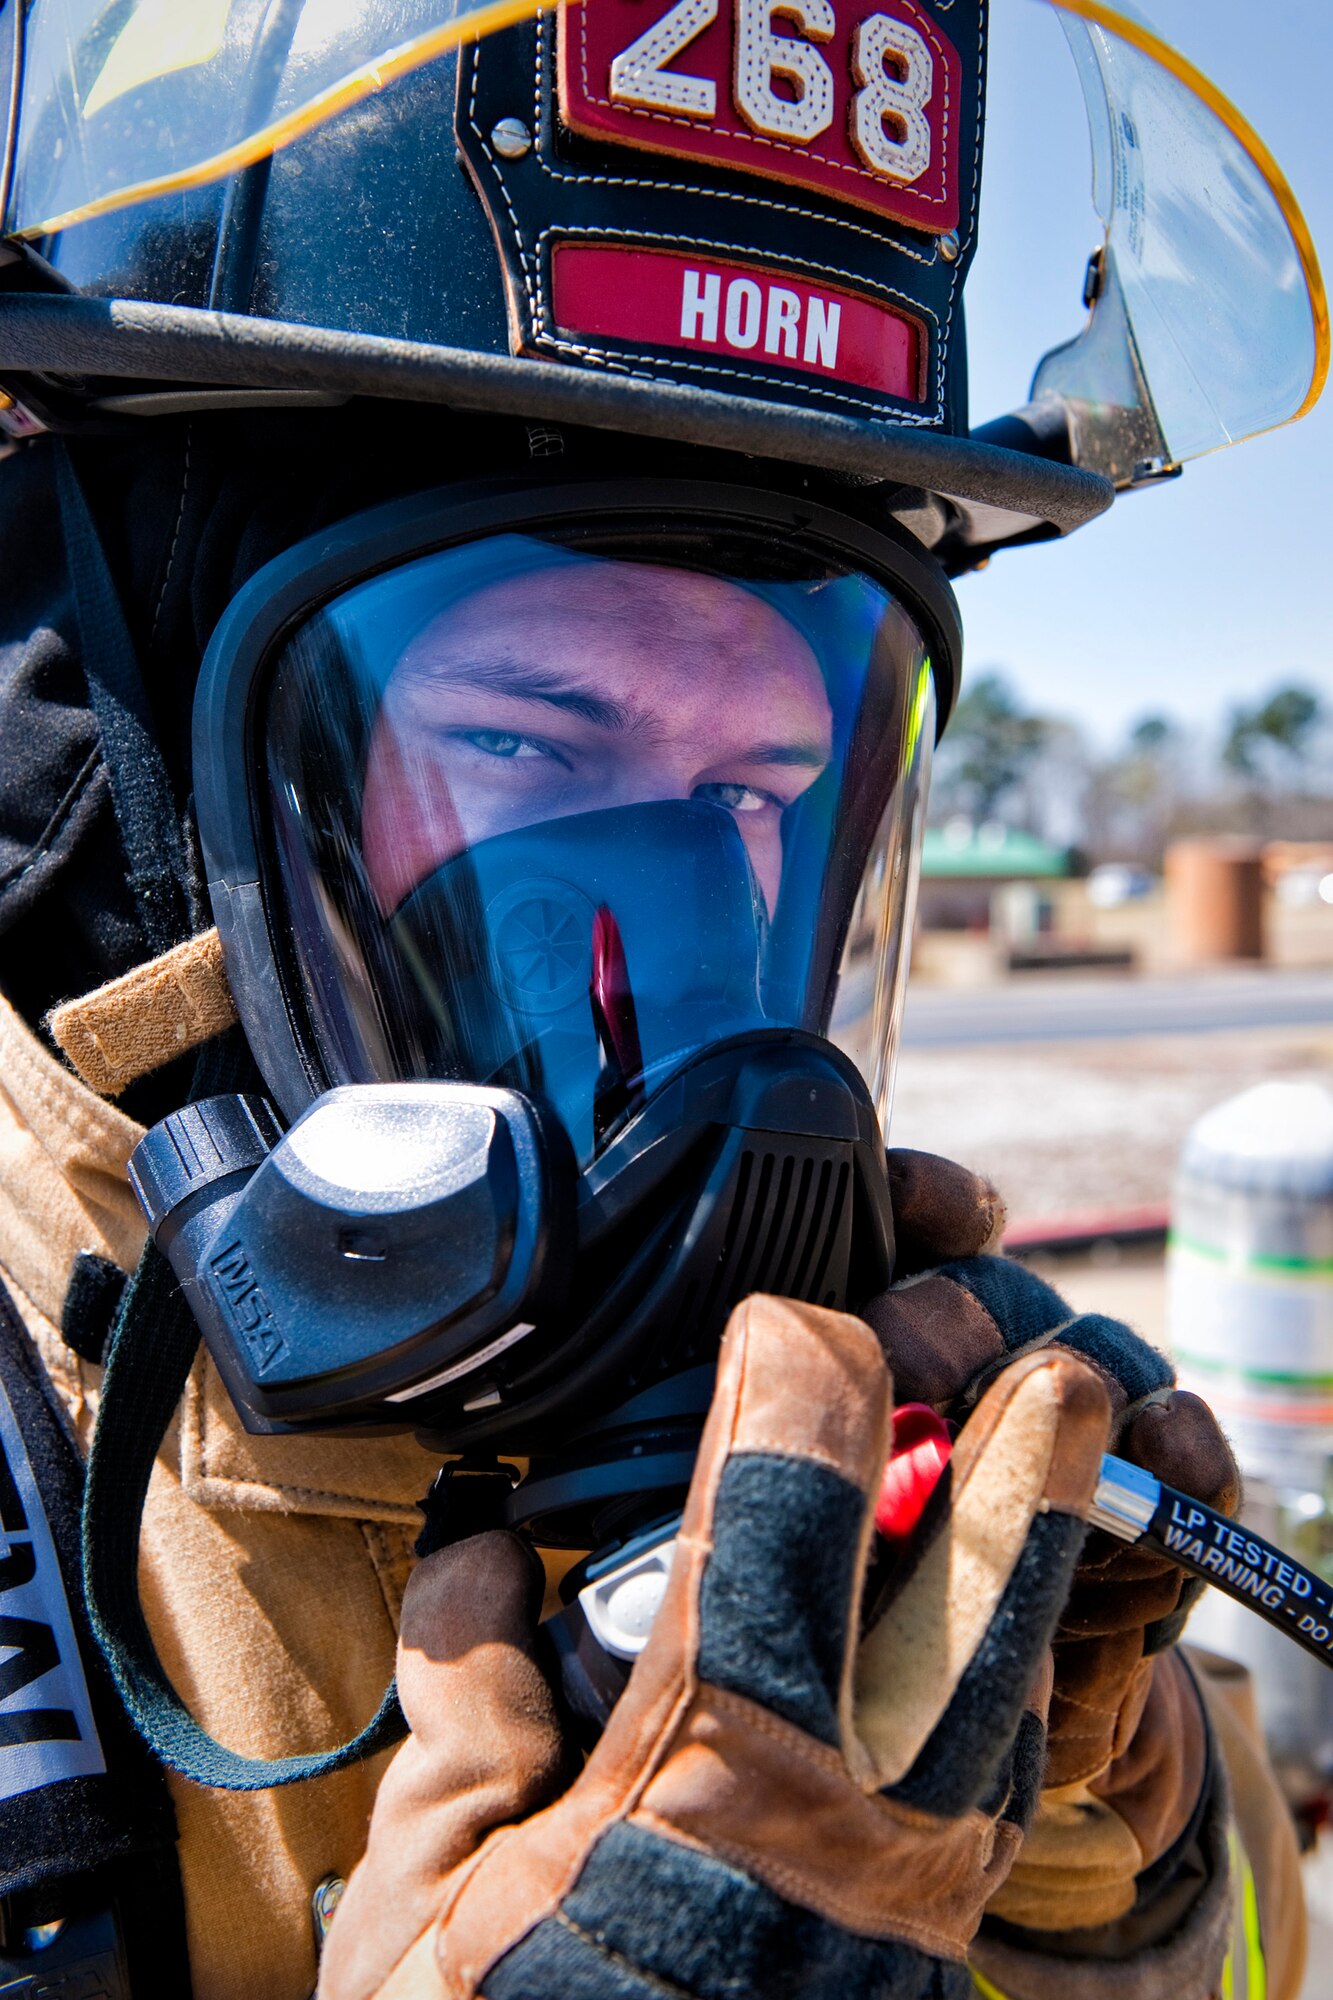 Portrait-Personality Photograph, 3rd Place

U.S. Army Spc. Matthew Horn, a firefighter with the 268th Engineer Detachment, South Carolina National Guard attaches the regulator/breathing tube to his mask at the South Carolina Fire Academy in Columbia, S.C., March 29, 2013. Firefighters of the 264th, 265th, 266th, 267th and 268th Engineer Detachments are performing their two-week annual training at the academy as part of their unit validation. (U.S. Air National Guard photo by Tech. Sgt. Jorge Intriago/Released)